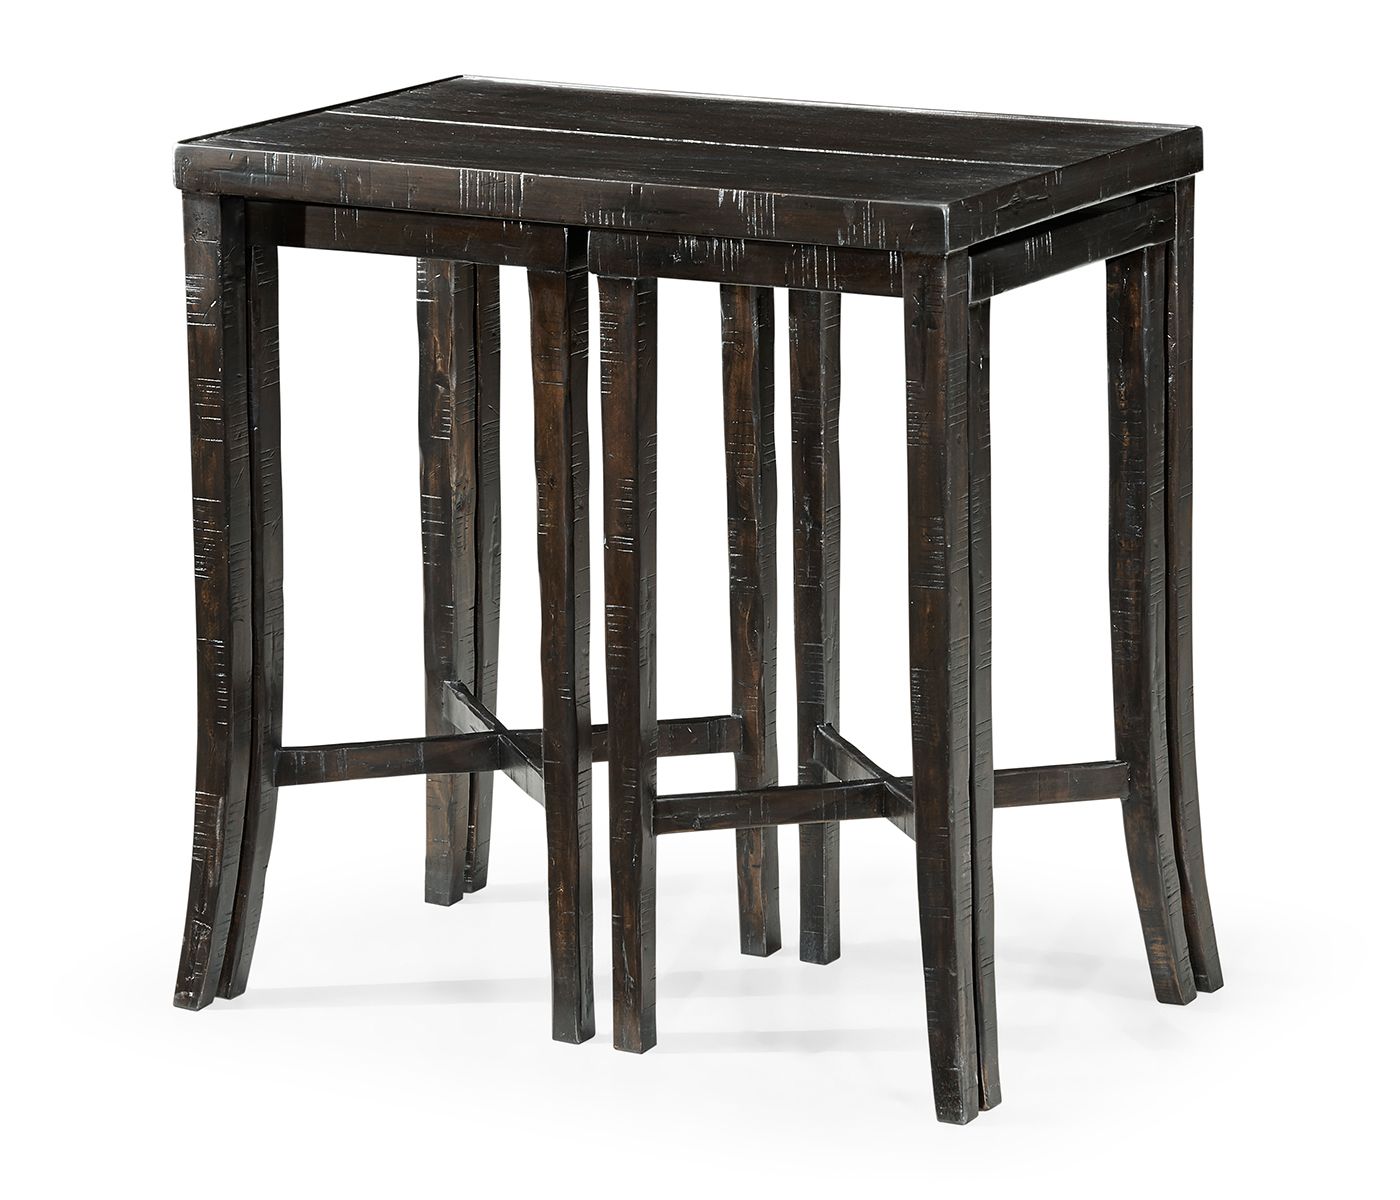 Widely Used Nesting Cocktail Tables Inside Nesting Cocktail Tables In Dark Ale (Gallery 14 of 20)